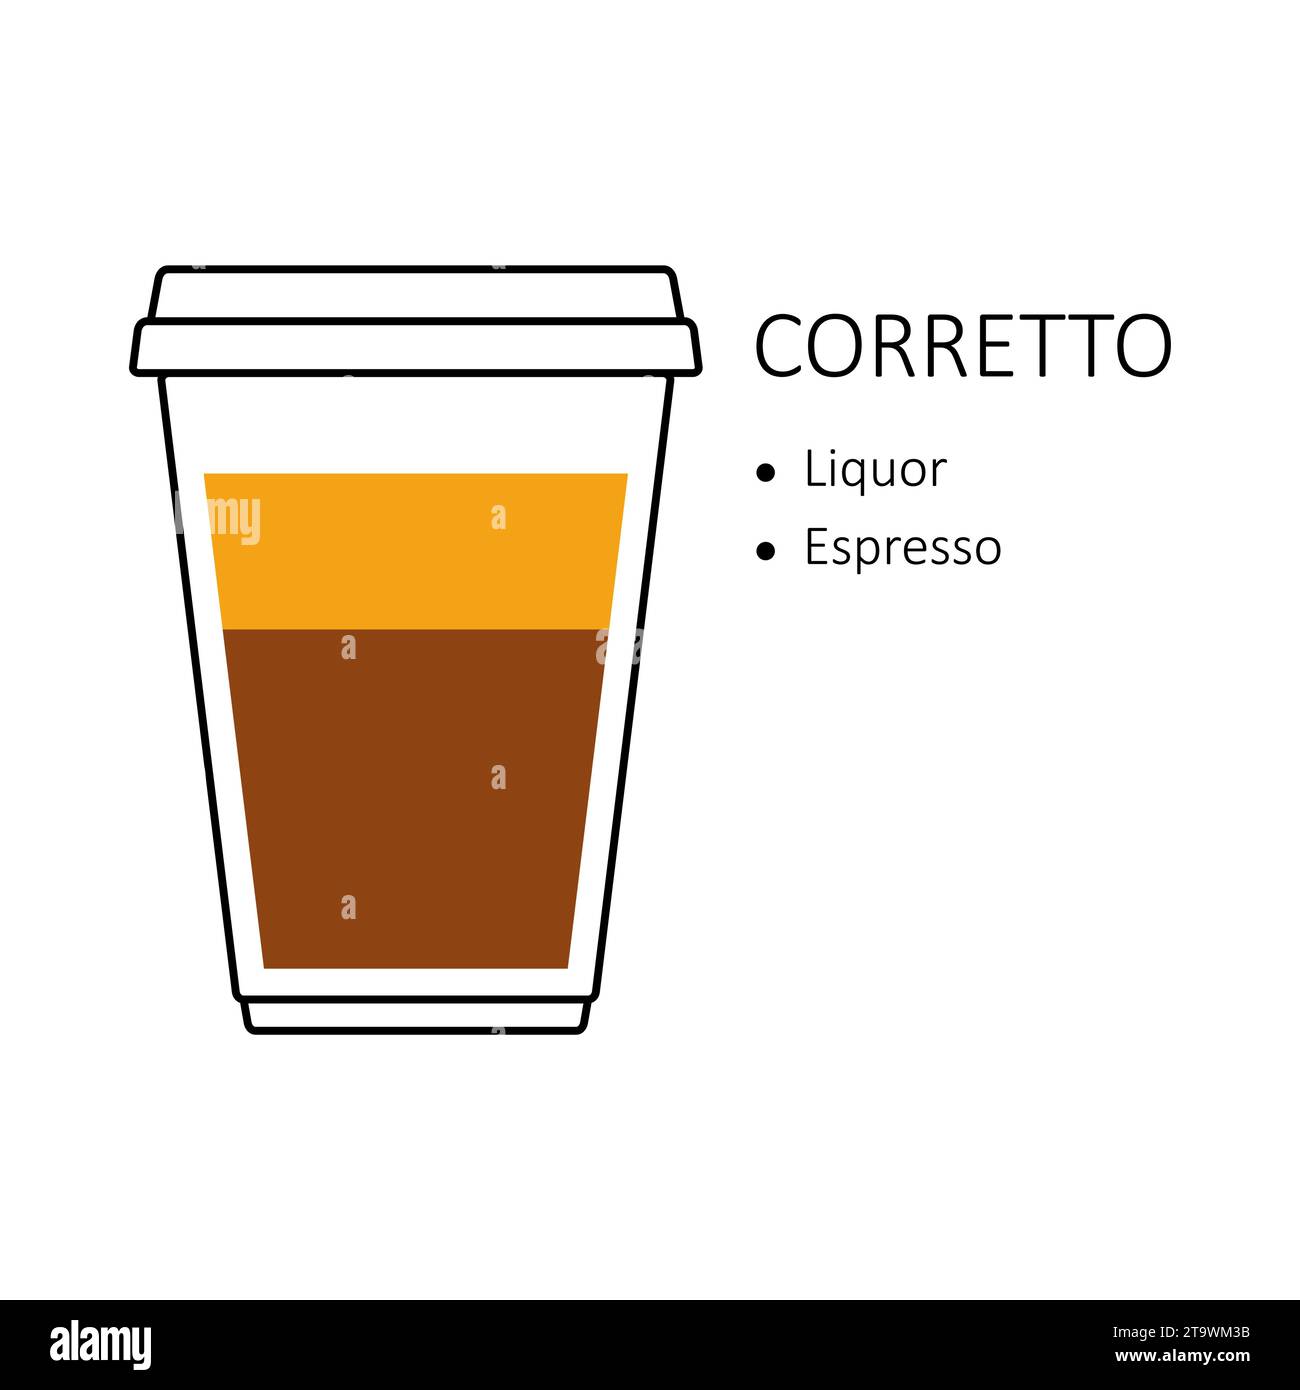 Corretto coffee recipe in disposable plastic cup takeaway isolated on white background. Preparation guide with layers of liquor and espresso. Coffee Stock Vector